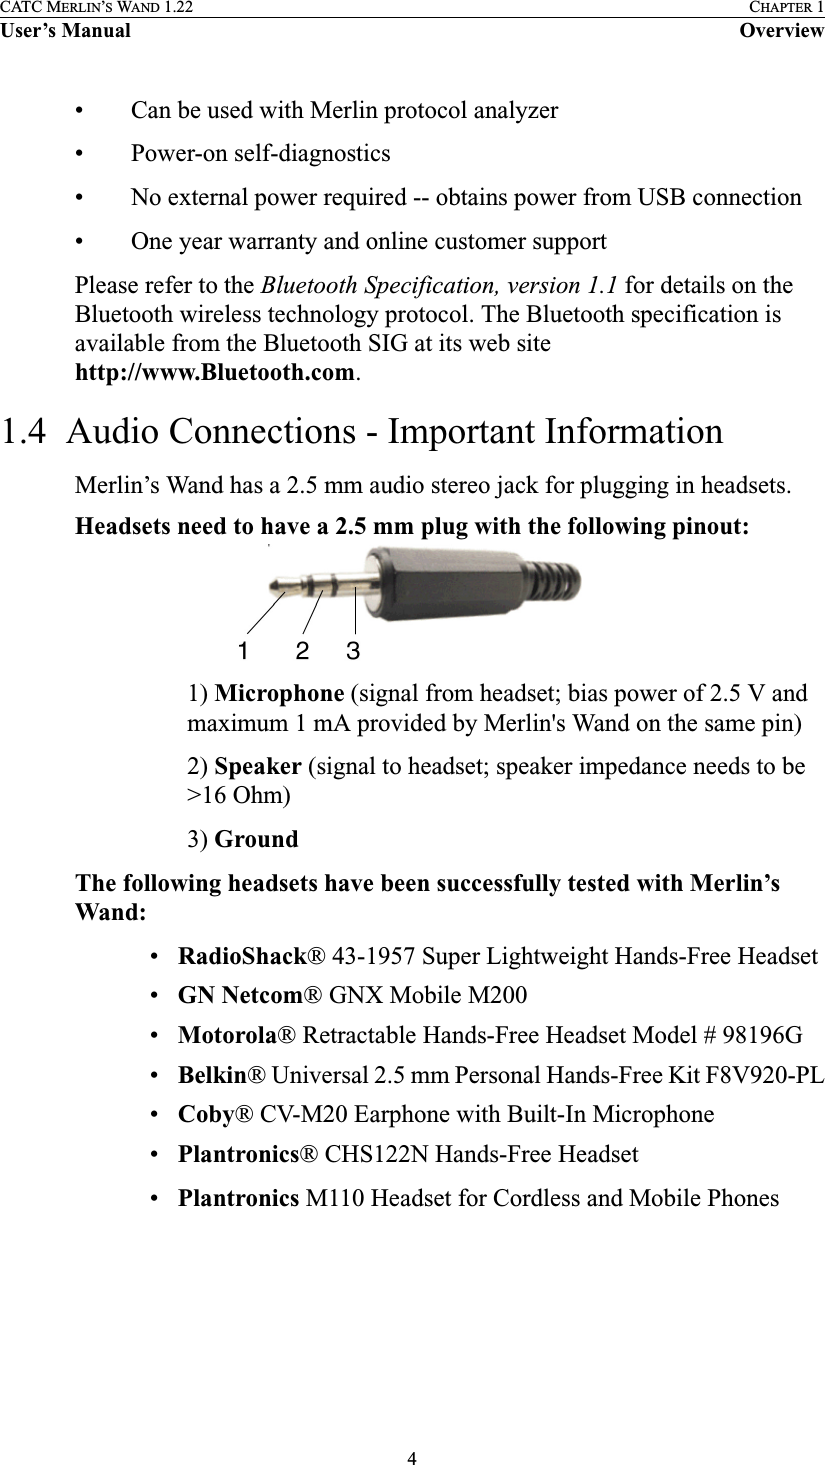 4CATC MERLIN’S WAND 1.22 CHAPTER 1User’s Manual Overview• Can be used with Merlin protocol analyzer• Power-on self-diagnostics• No external power required -- obtains power from USB connection• One year warranty and online customer supportPlease refer to the Bluetooth Specification, version 1.1 for details on the Bluetooth wireless technology protocol. The Bluetooth specification is available from the Bluetooth SIG at its web site http://www.Bluetooth.com.1.4  Audio Connections - Important InformationMerlin’s Wand has a 2.5 mm audio stereo jack for plugging in headsets.Headsets need to have a 2.5 mm plug with the following pinout:1) Microphone (signal from headset; bias power of 2.5 V and maximum 1 mA provided by Merlin&apos;s Wand on the same pin)2) Speaker (signal to headset; speaker impedance needs to be &gt;16 Ohm)3) GroundThe following headsets have been successfully tested with Merlin’s Wand:•RadioShack® 43-1957 Super Lightweight Hands-Free Headset•GN Netcom® GNX Mobile M200•Motorola® Retractable Hands-Free Headset Model # 98196G •Belkin® Universal 2.5 mm Personal Hands-Free Kit F8V920-PL•Coby® CV-M20 Earphone with Built-In Microphone•Plantronics® CHS122N Hands-Free Headset•Plantronics M110 Headset for Cordless and Mobile Phones